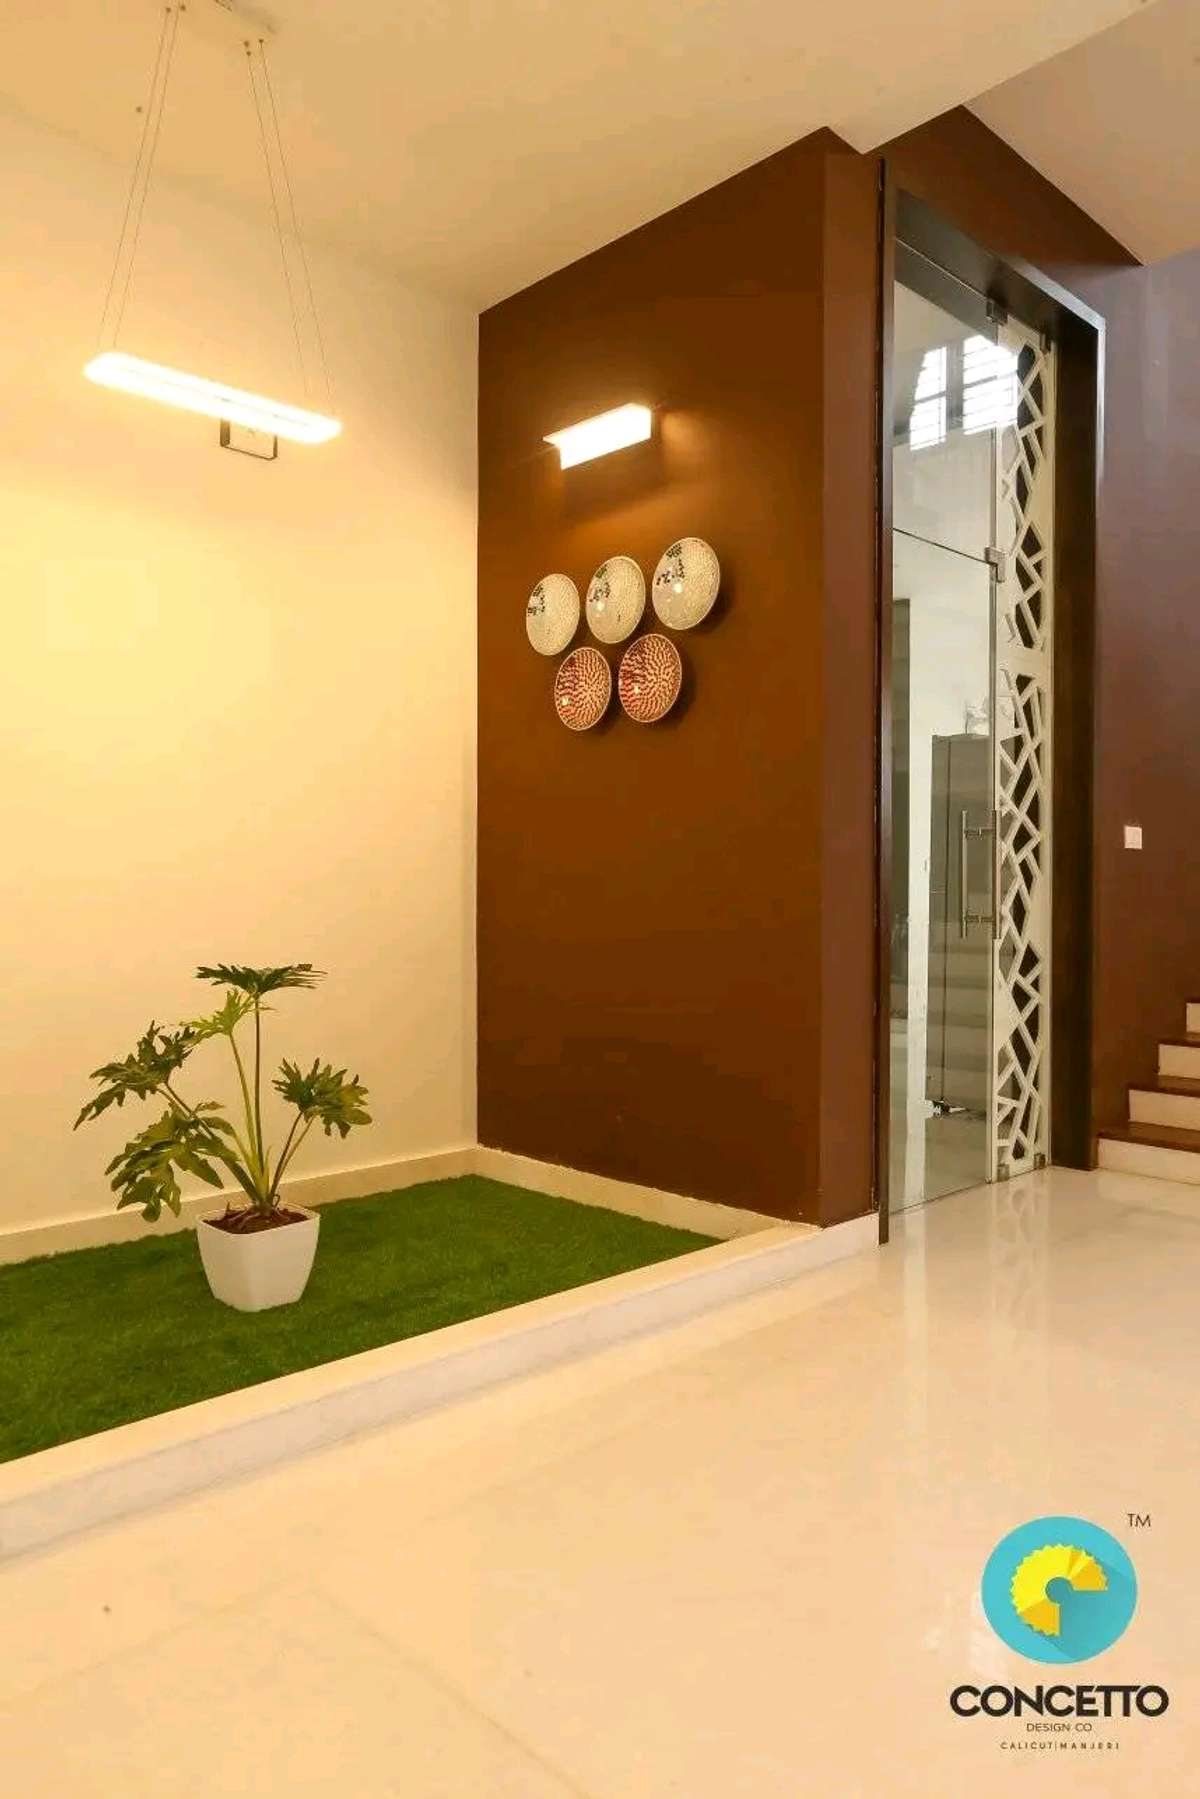 Lighting, Wall Designs by Architect Concetto Design Co, Kozhikode | Kolo